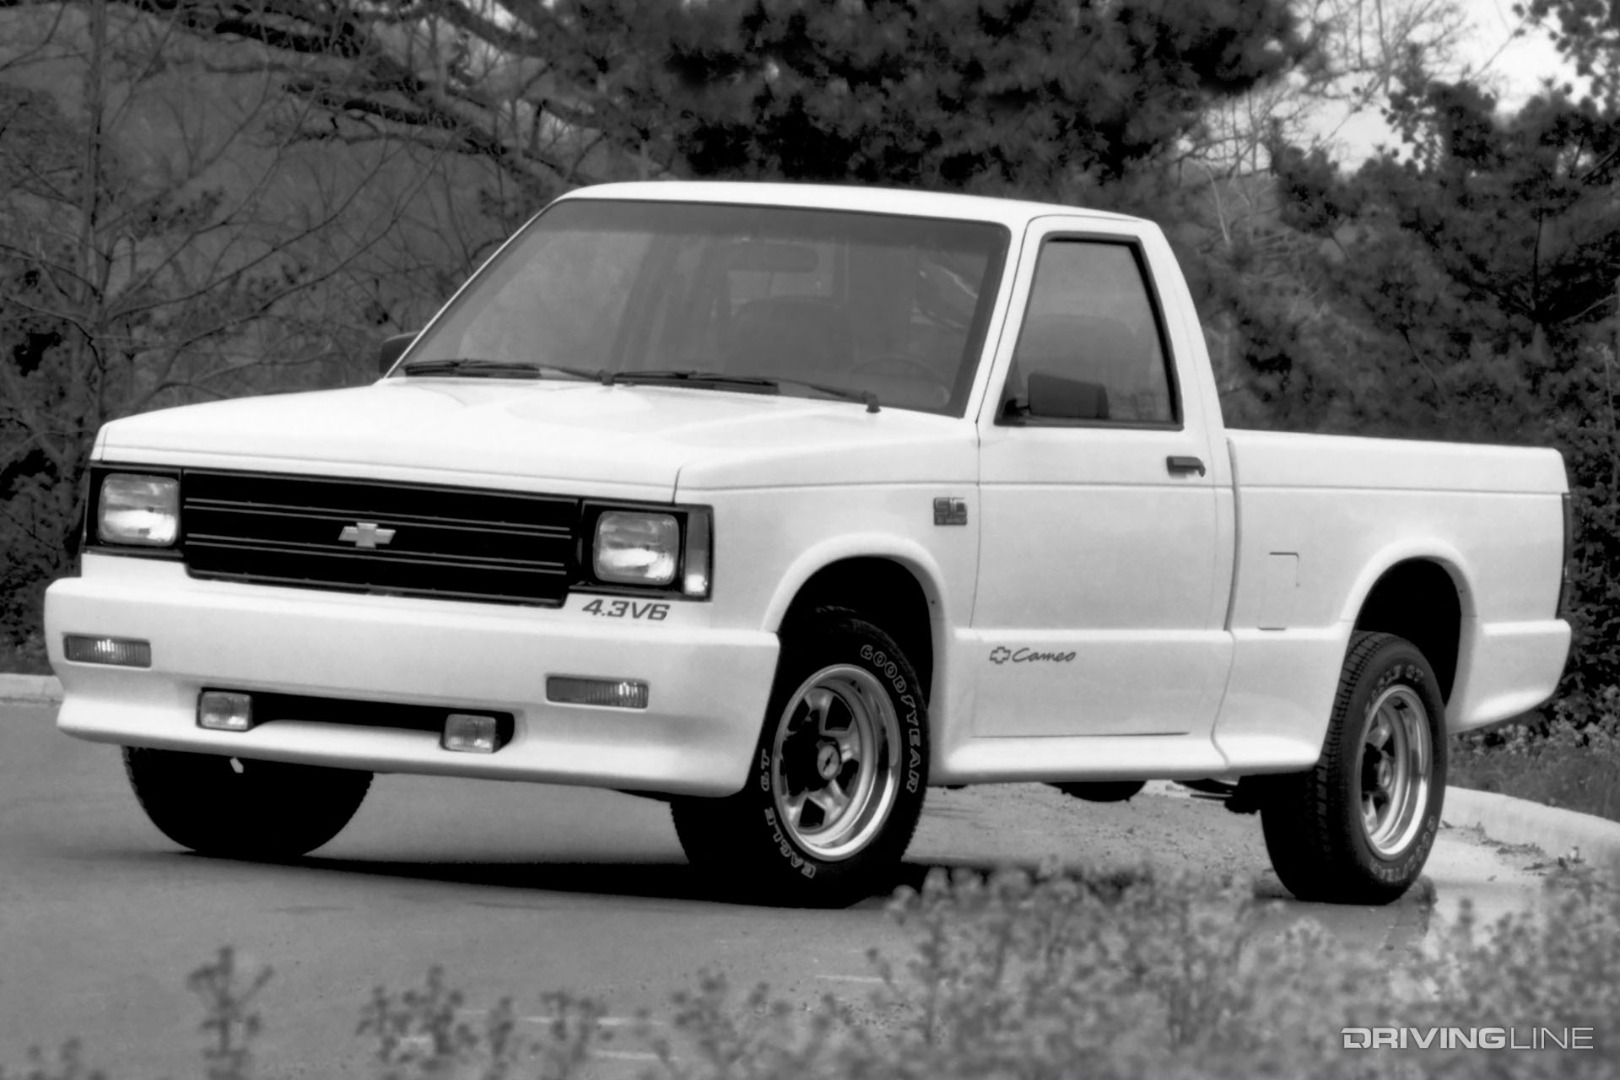 The History Of GM's 4.3 Vortec V6, The King Of Compact Truck Motors |  DrivingLine